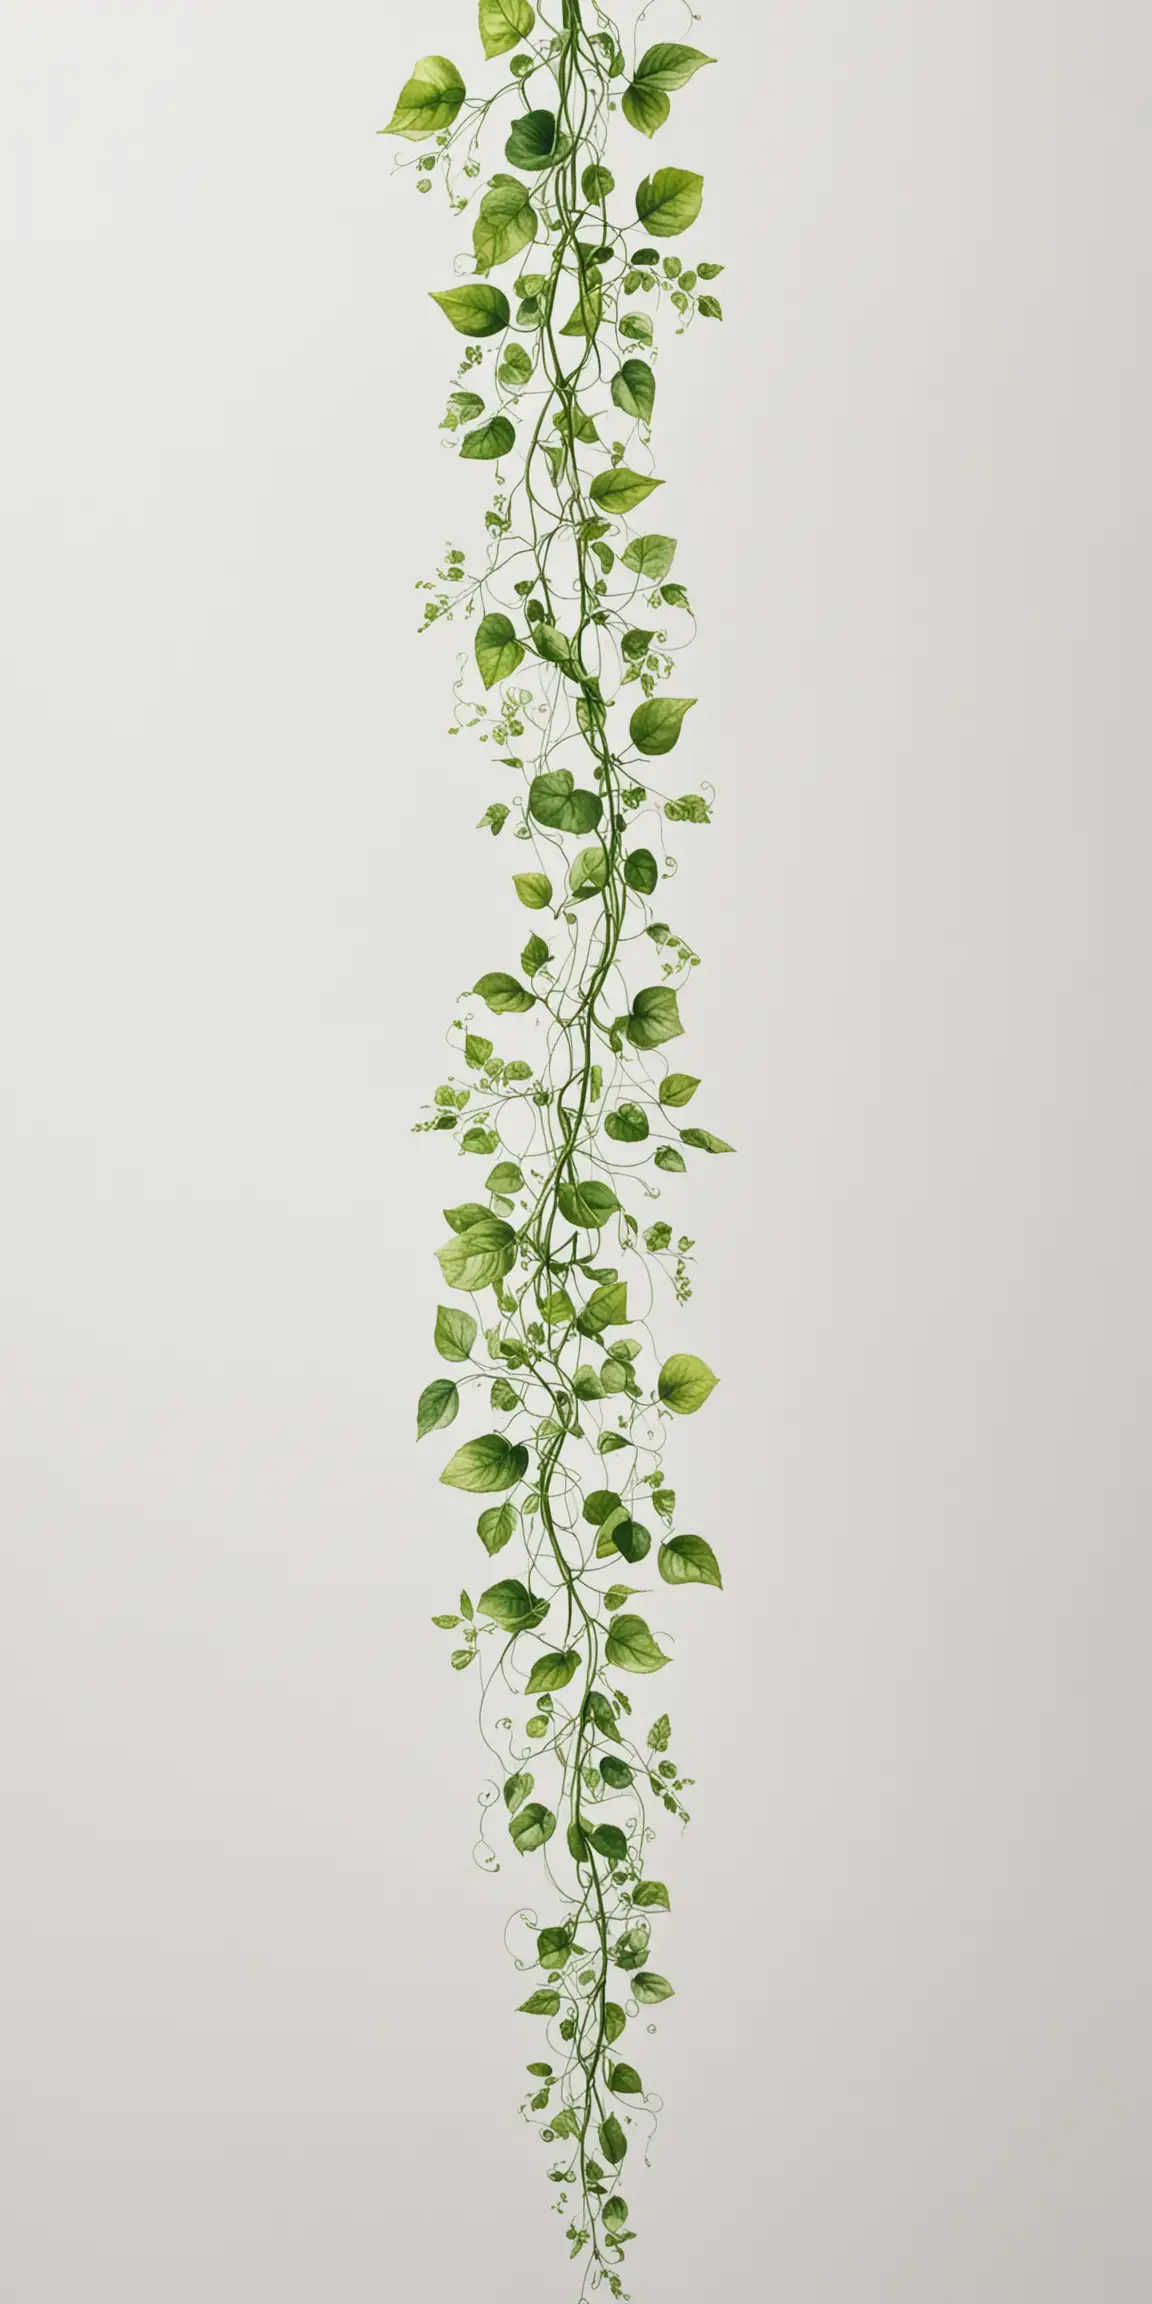 Draw a realistic green vine trailing down the Centre of the image, no frame. Leave a wide blank margin all around, white background